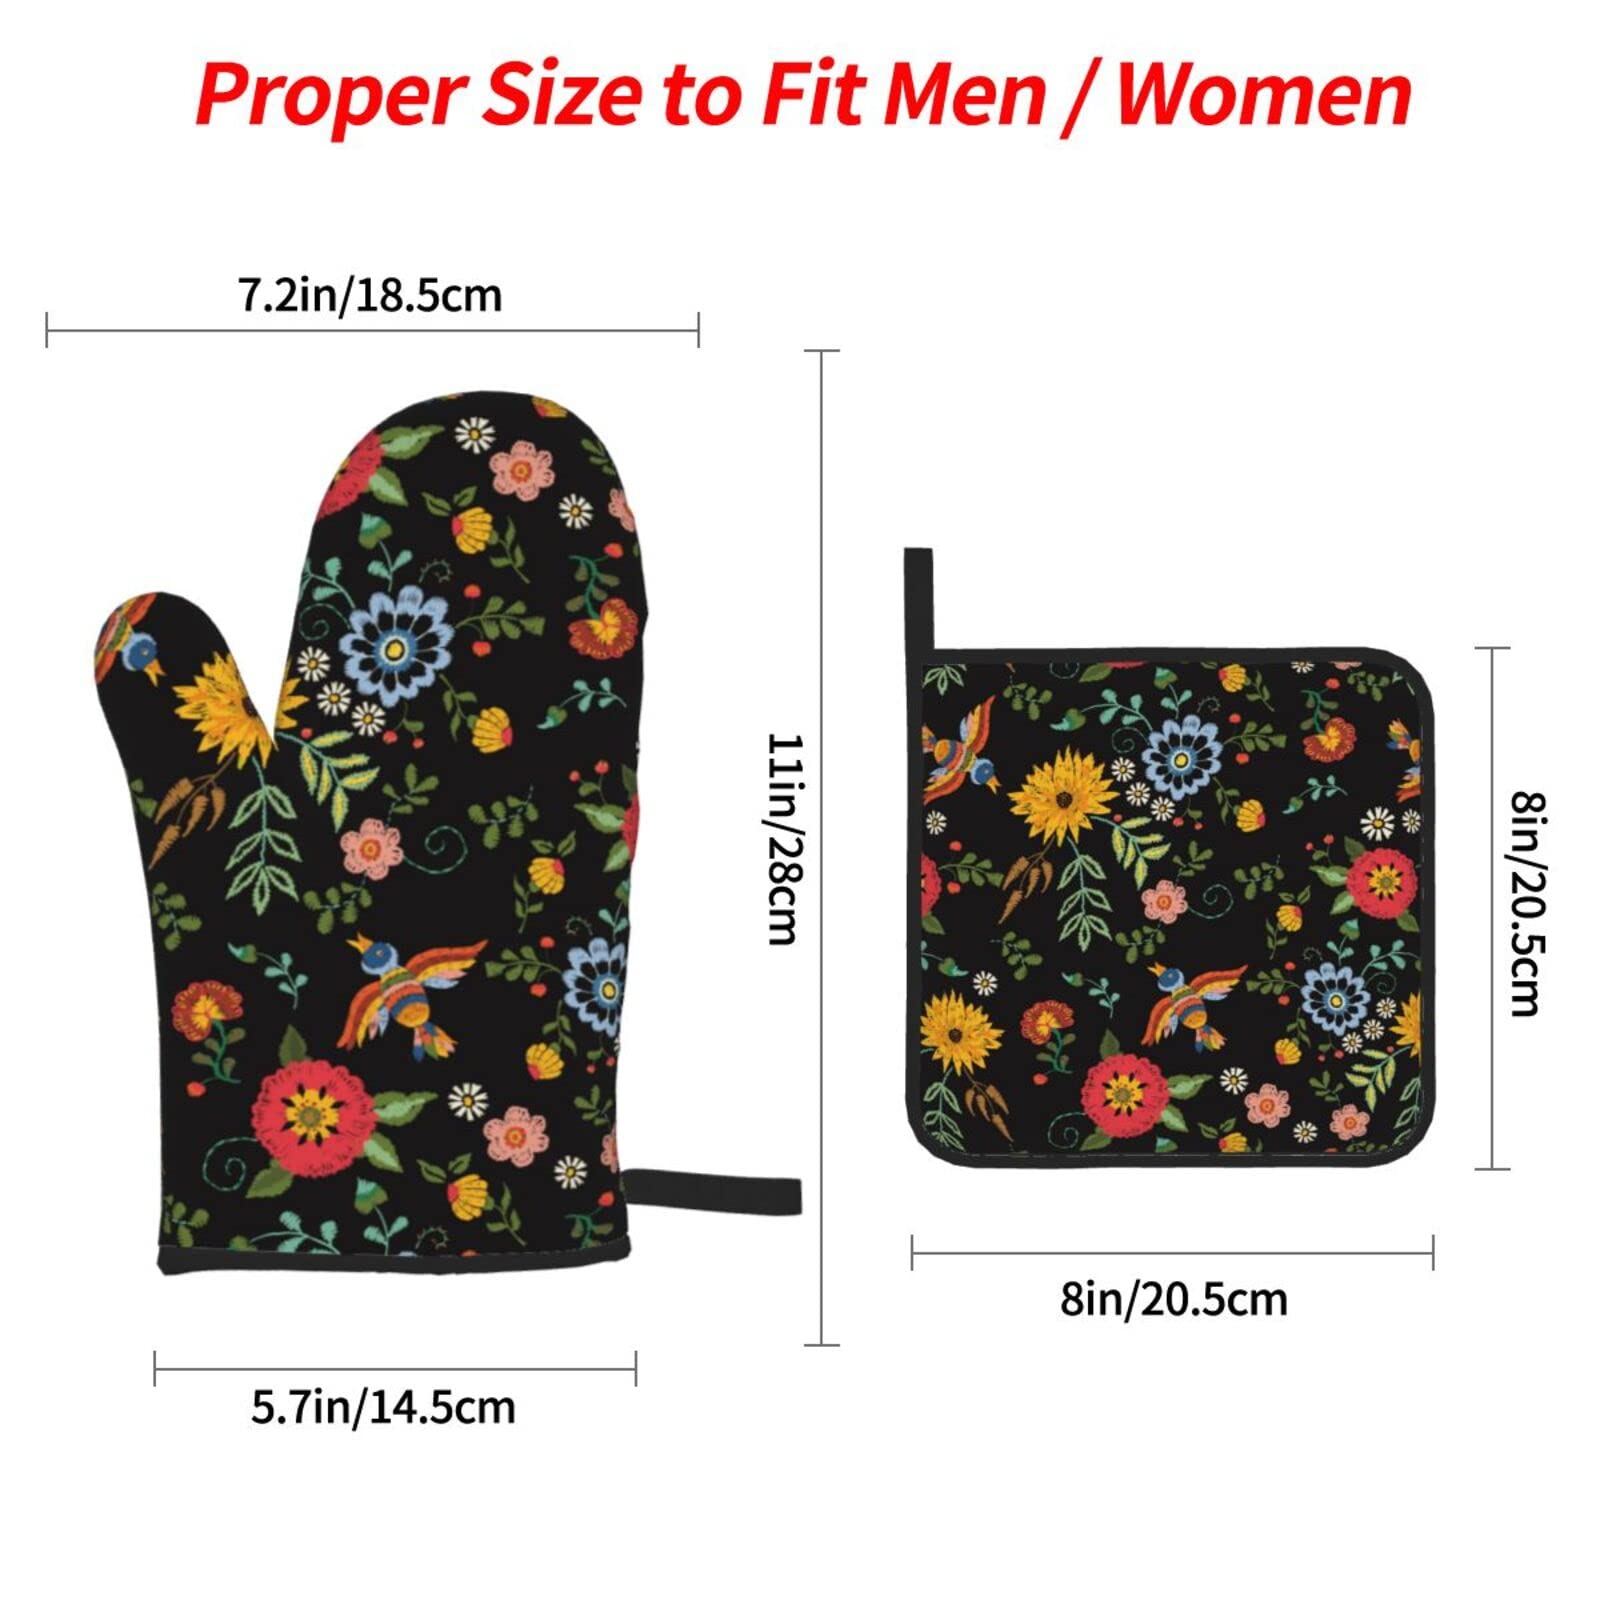 Colorful Floral Birds Oven Mitts and Pot Holders Sets of 4,Non-Slip Heat Resistant Oven Gloves for Baking Cooking Grilling BBQ